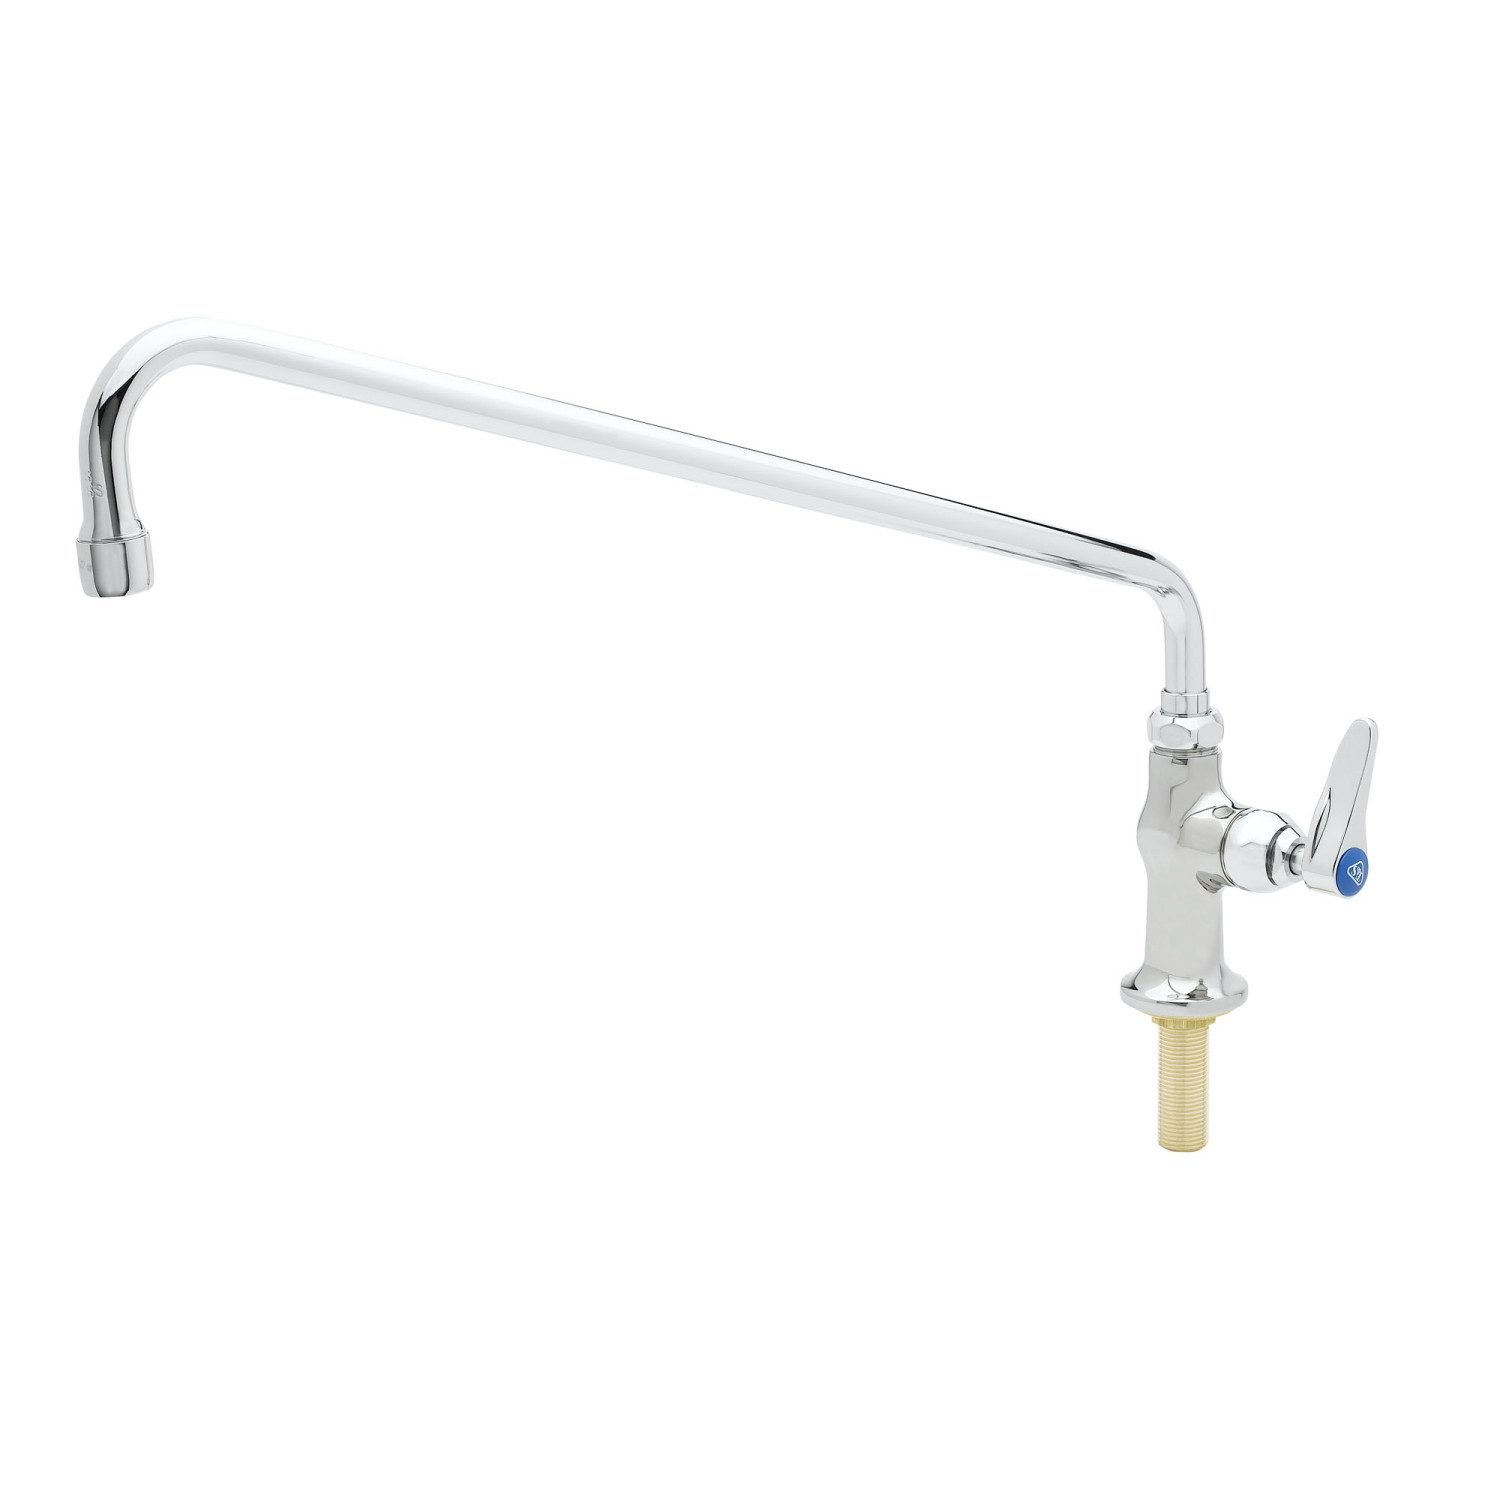 T&S Brass Single Pantry Faucet (with Nozzle): B-205